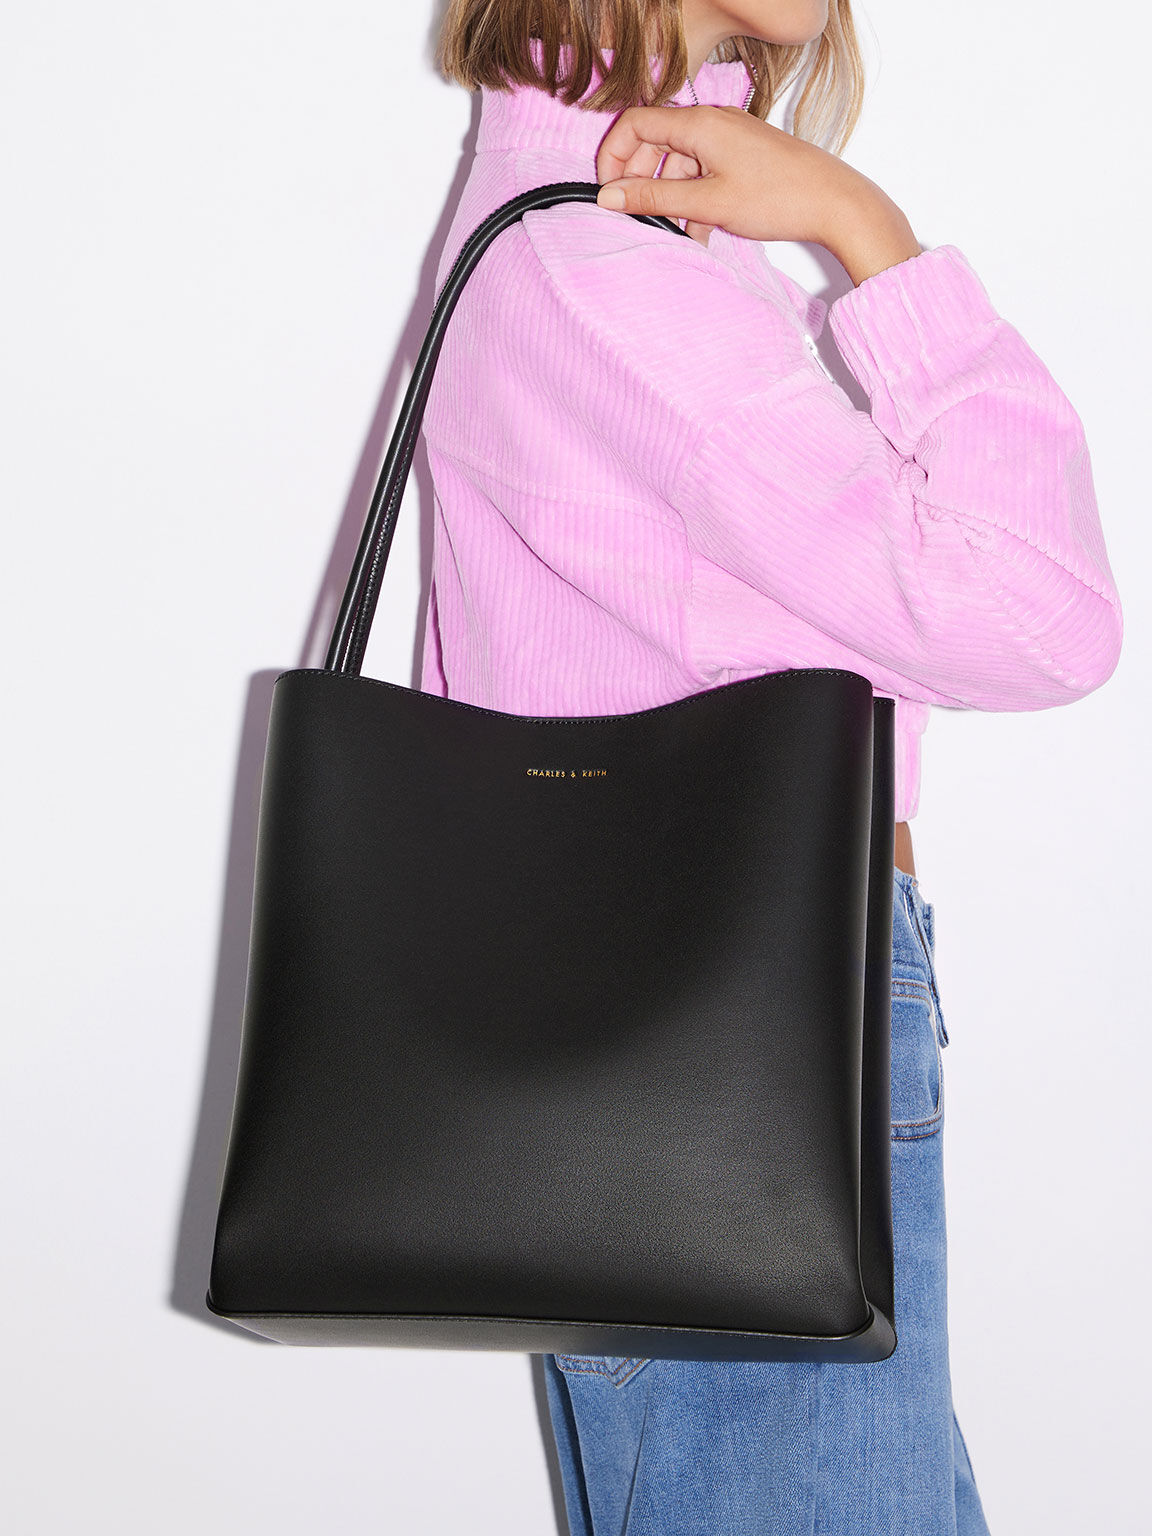 charles keith tote bag for school｜TikTok Search